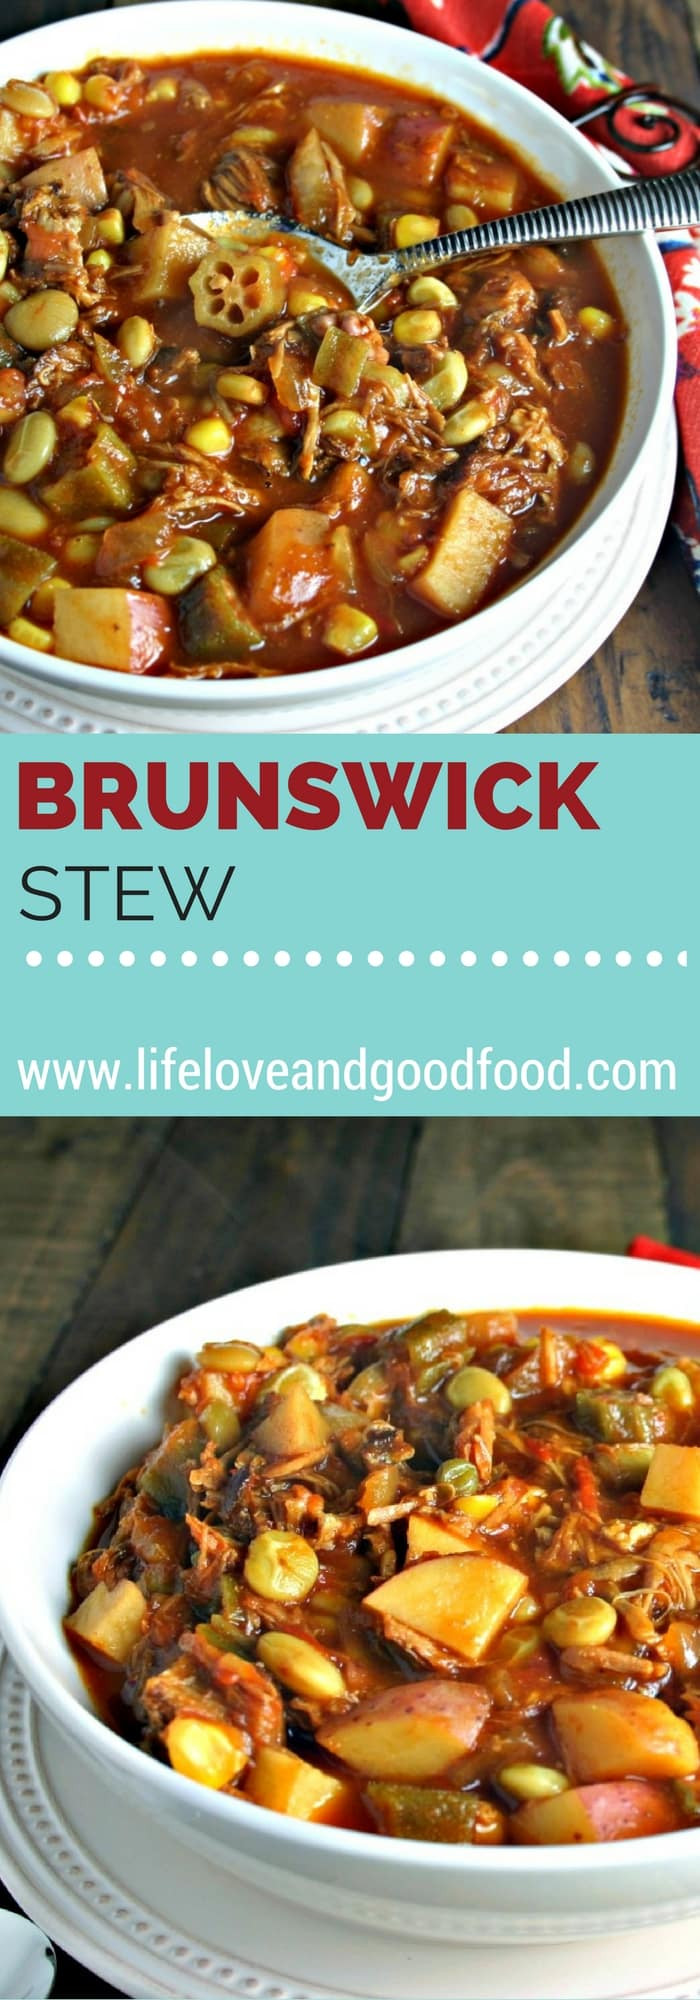 Top 25 Brunswick Stew Recipe southern Living - Home, Family, Style and ...